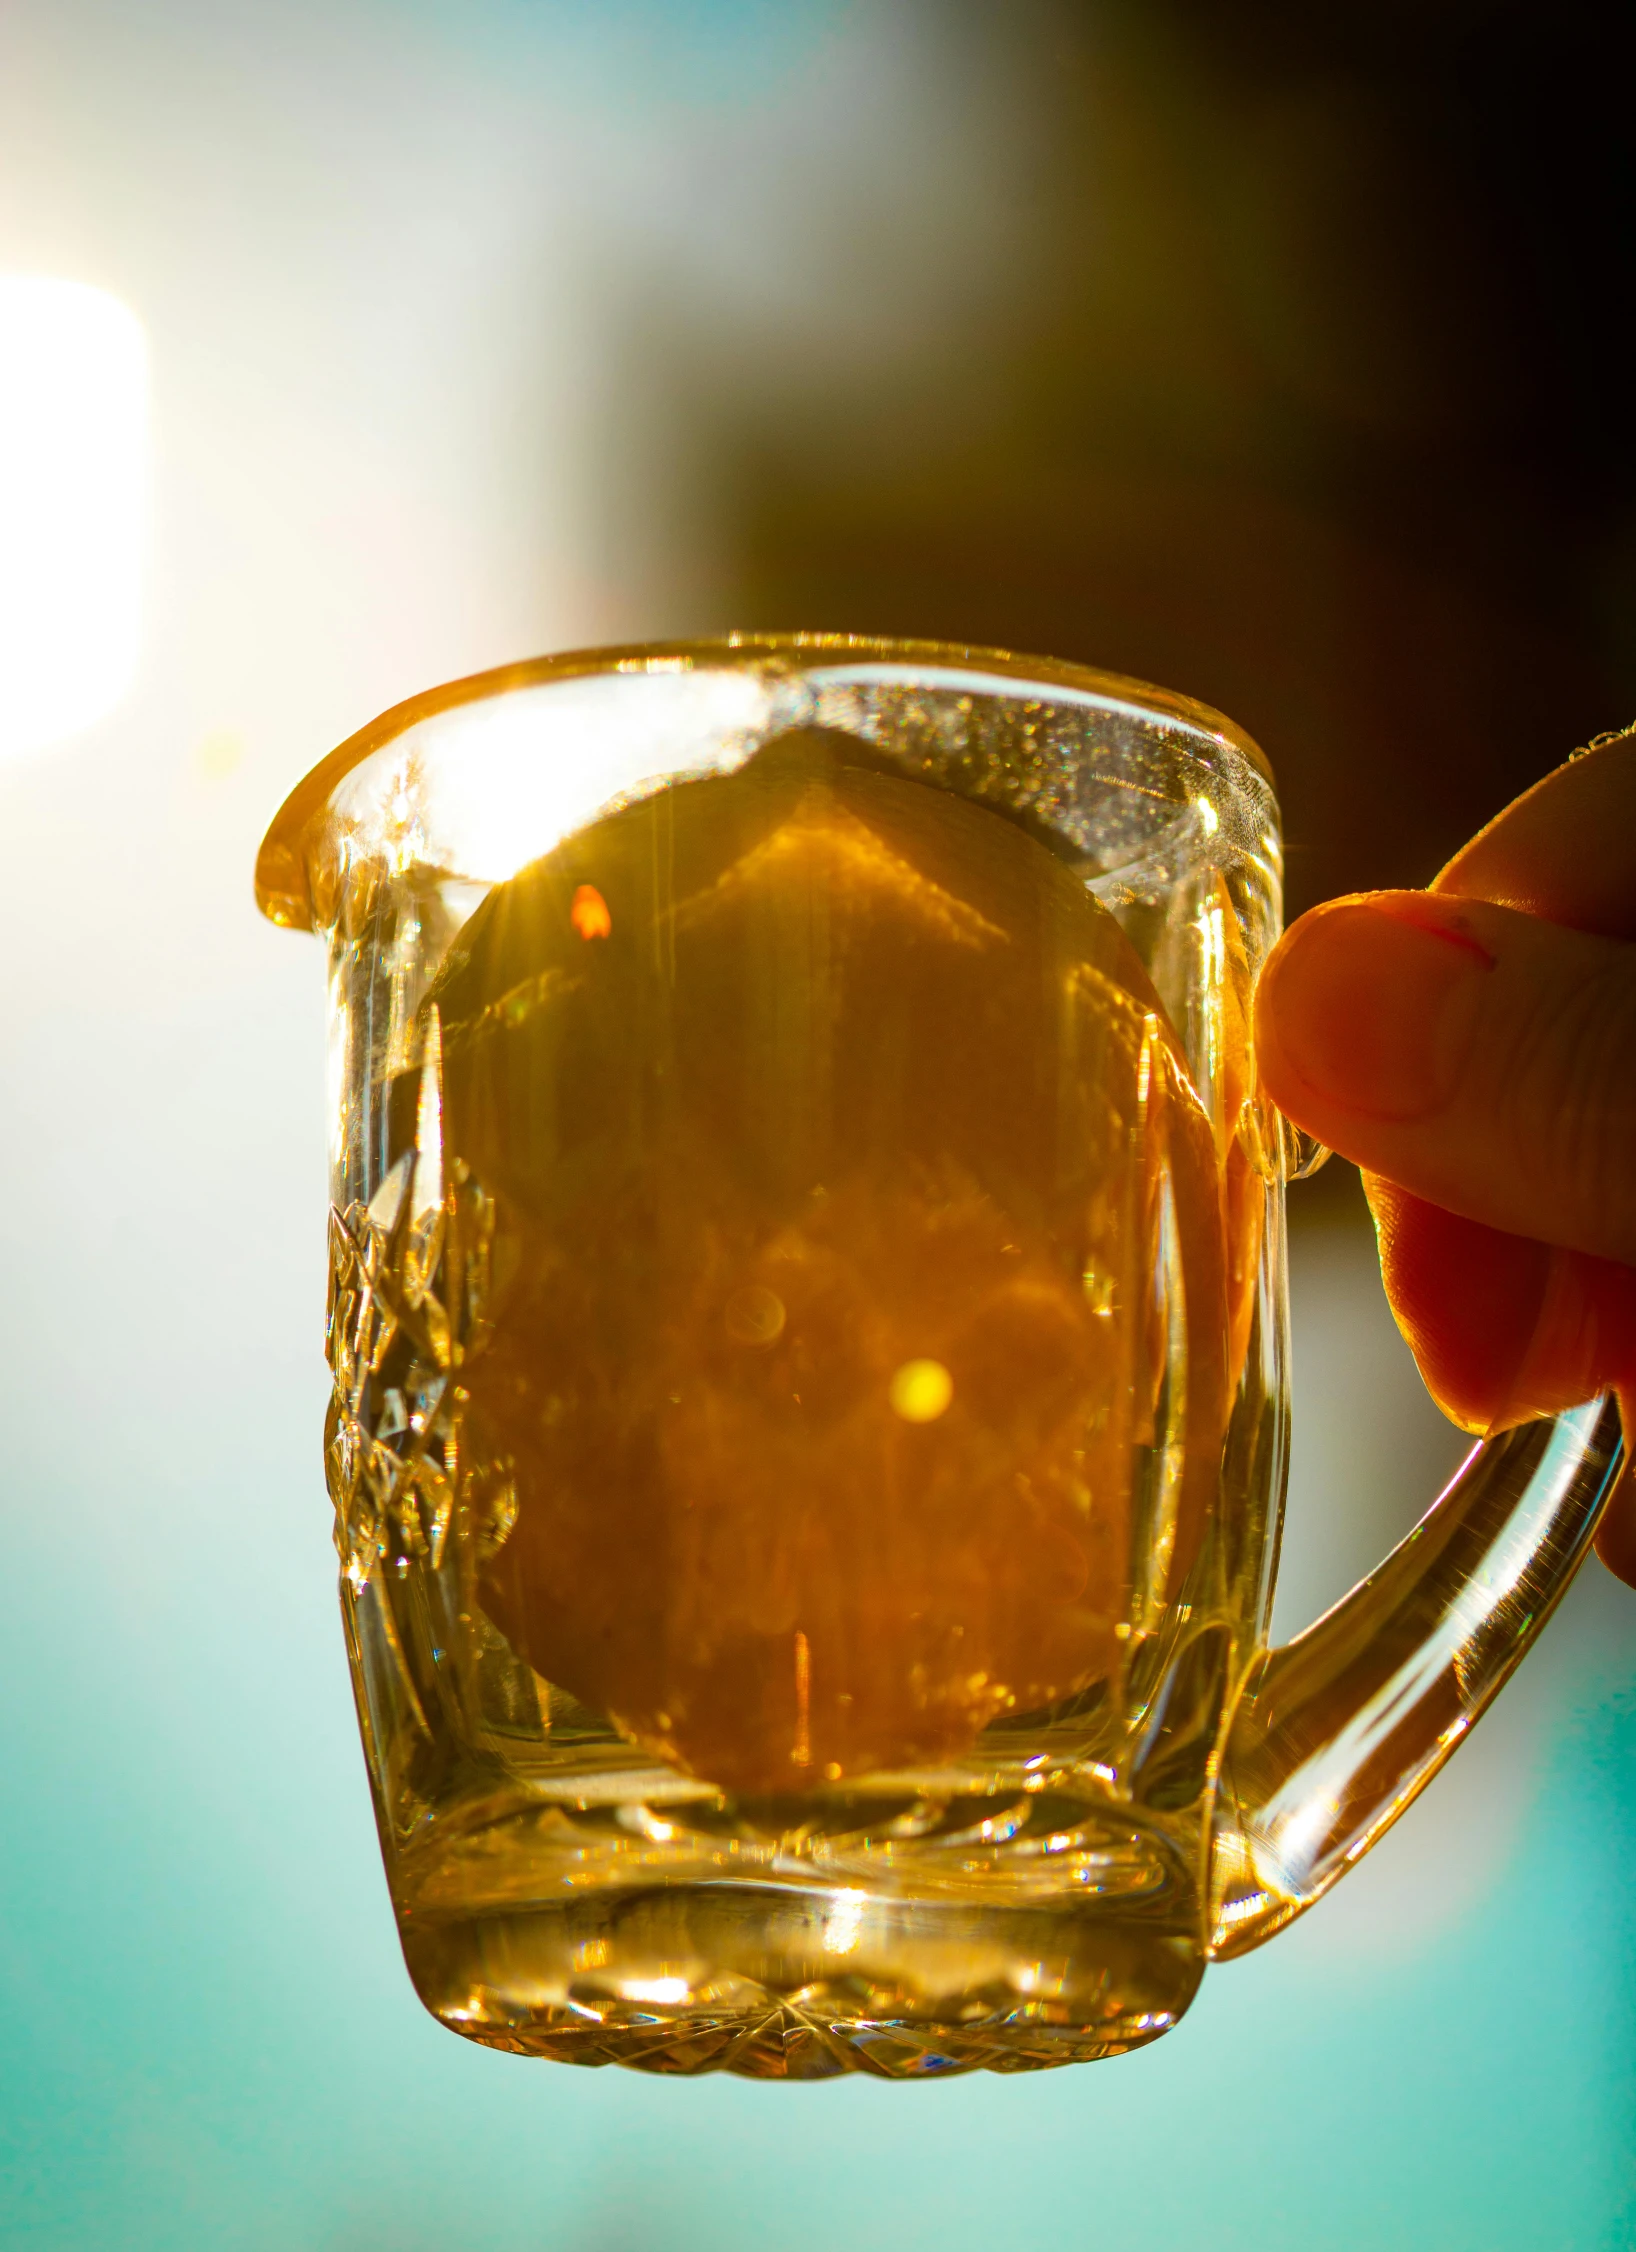 a close up of a person holding a glass of beer, by Adam Marczyński, golden hour”, “ golden cup, slide show, glass jar